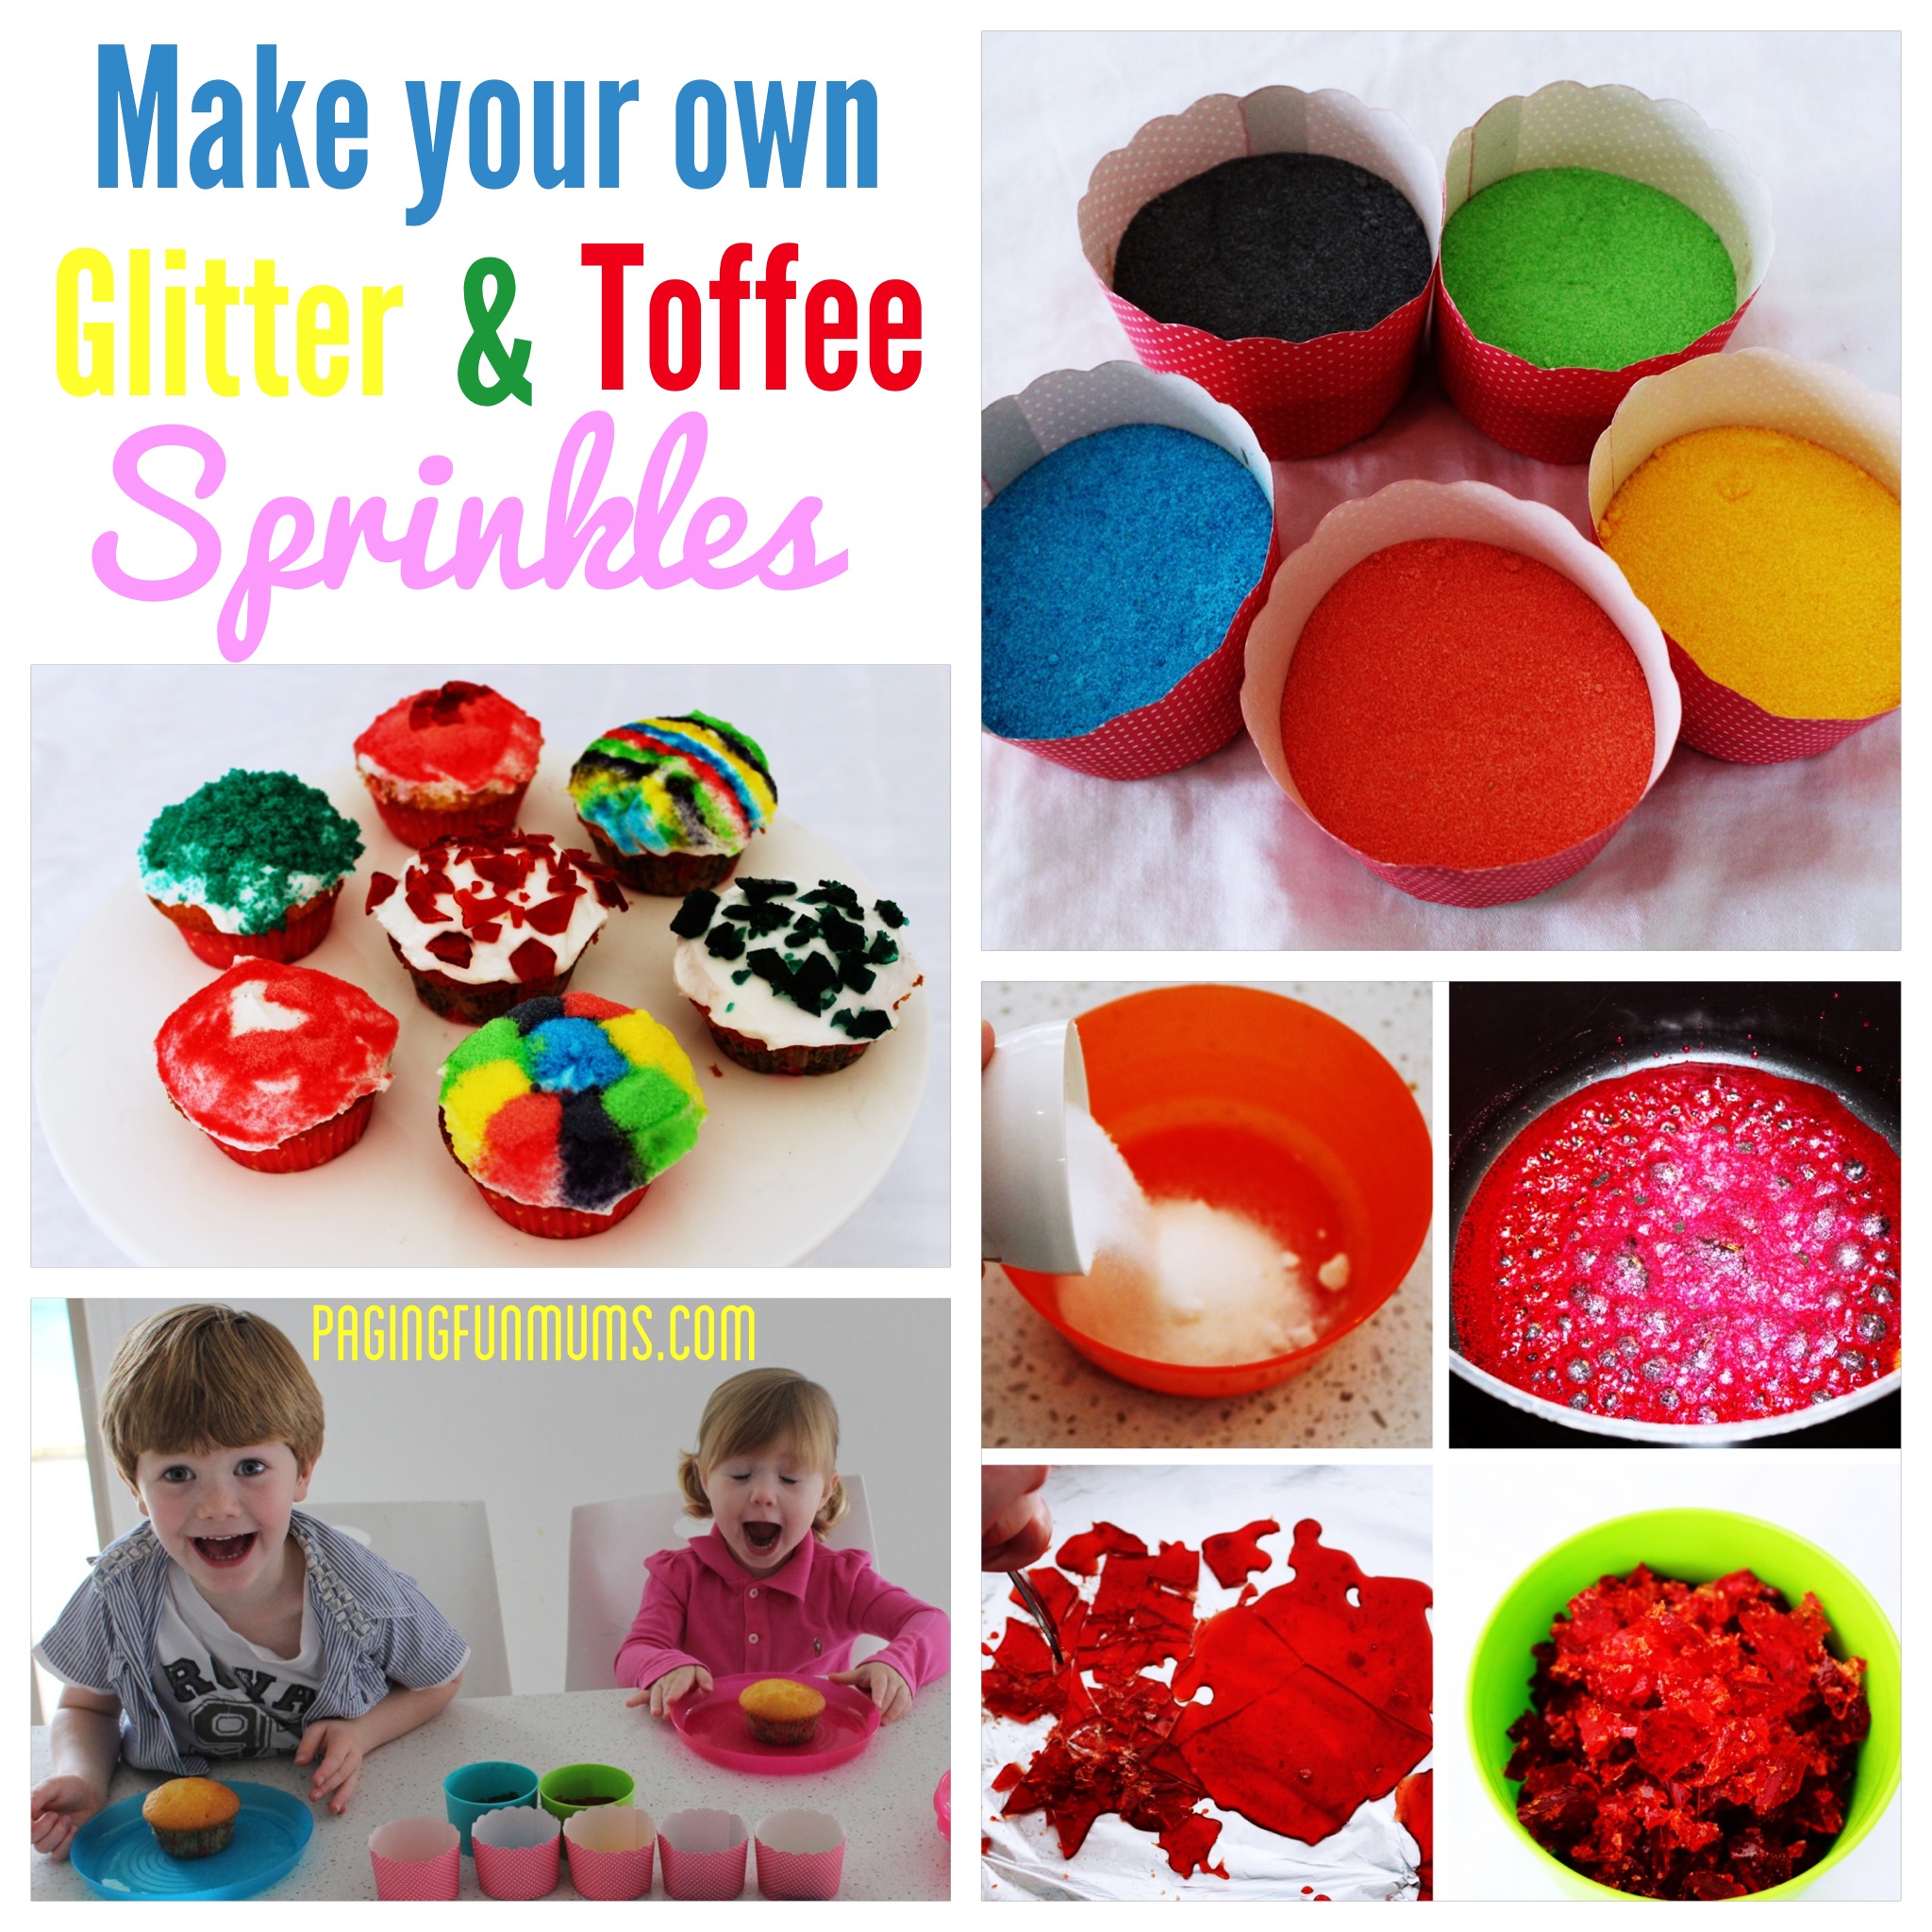 Make your own Glitter & Toffee Sprinkles!